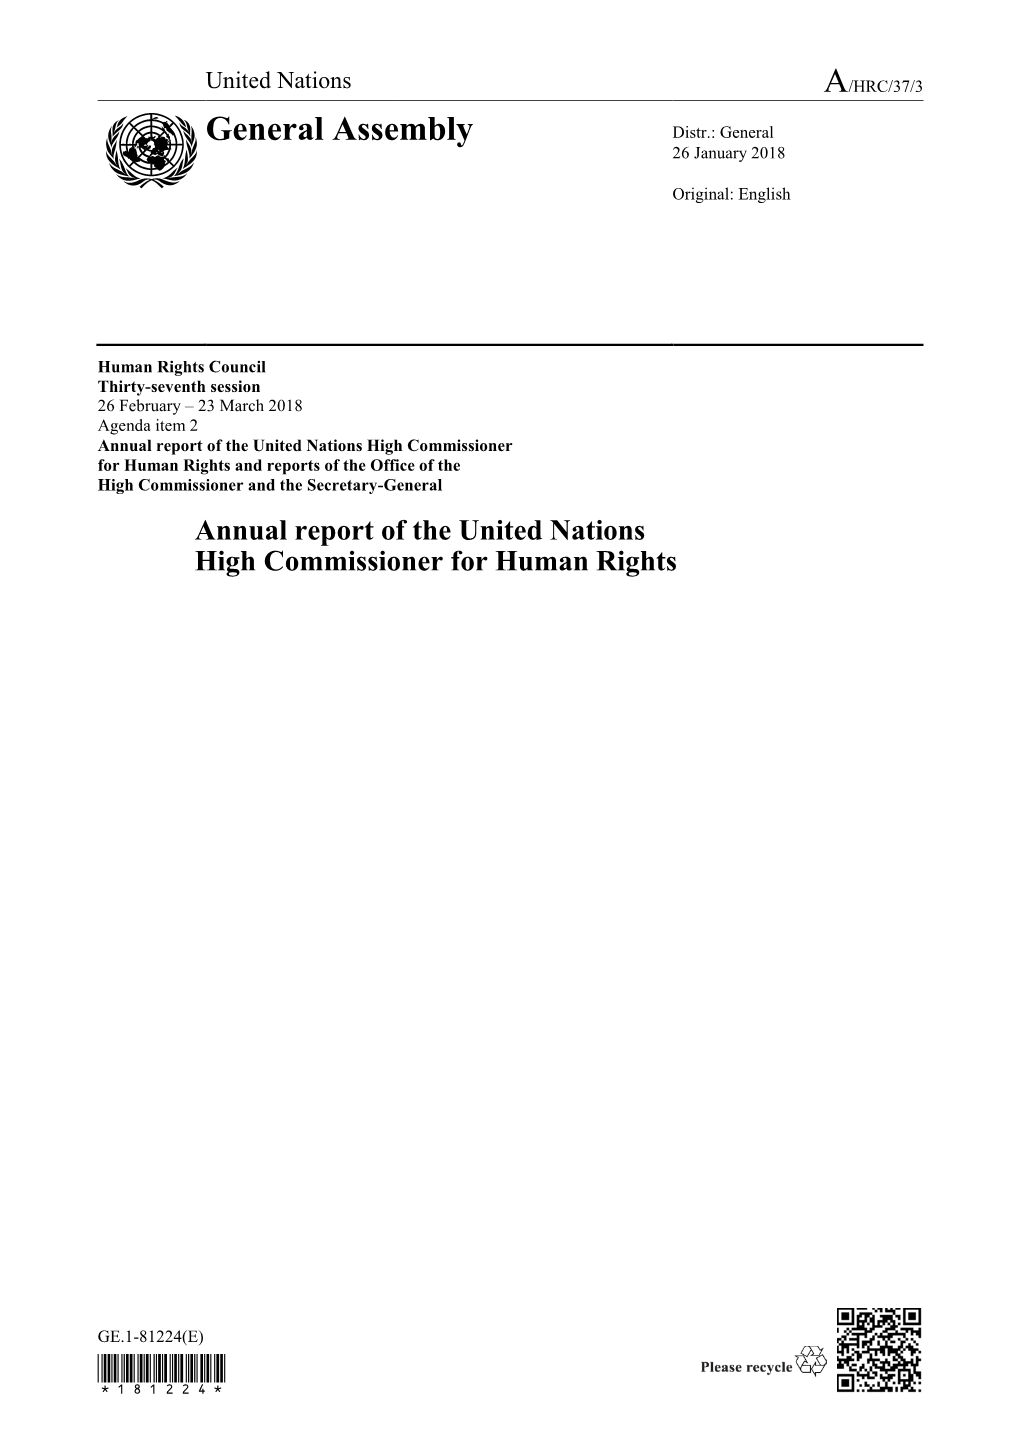 2017 Annual Report of the UN High